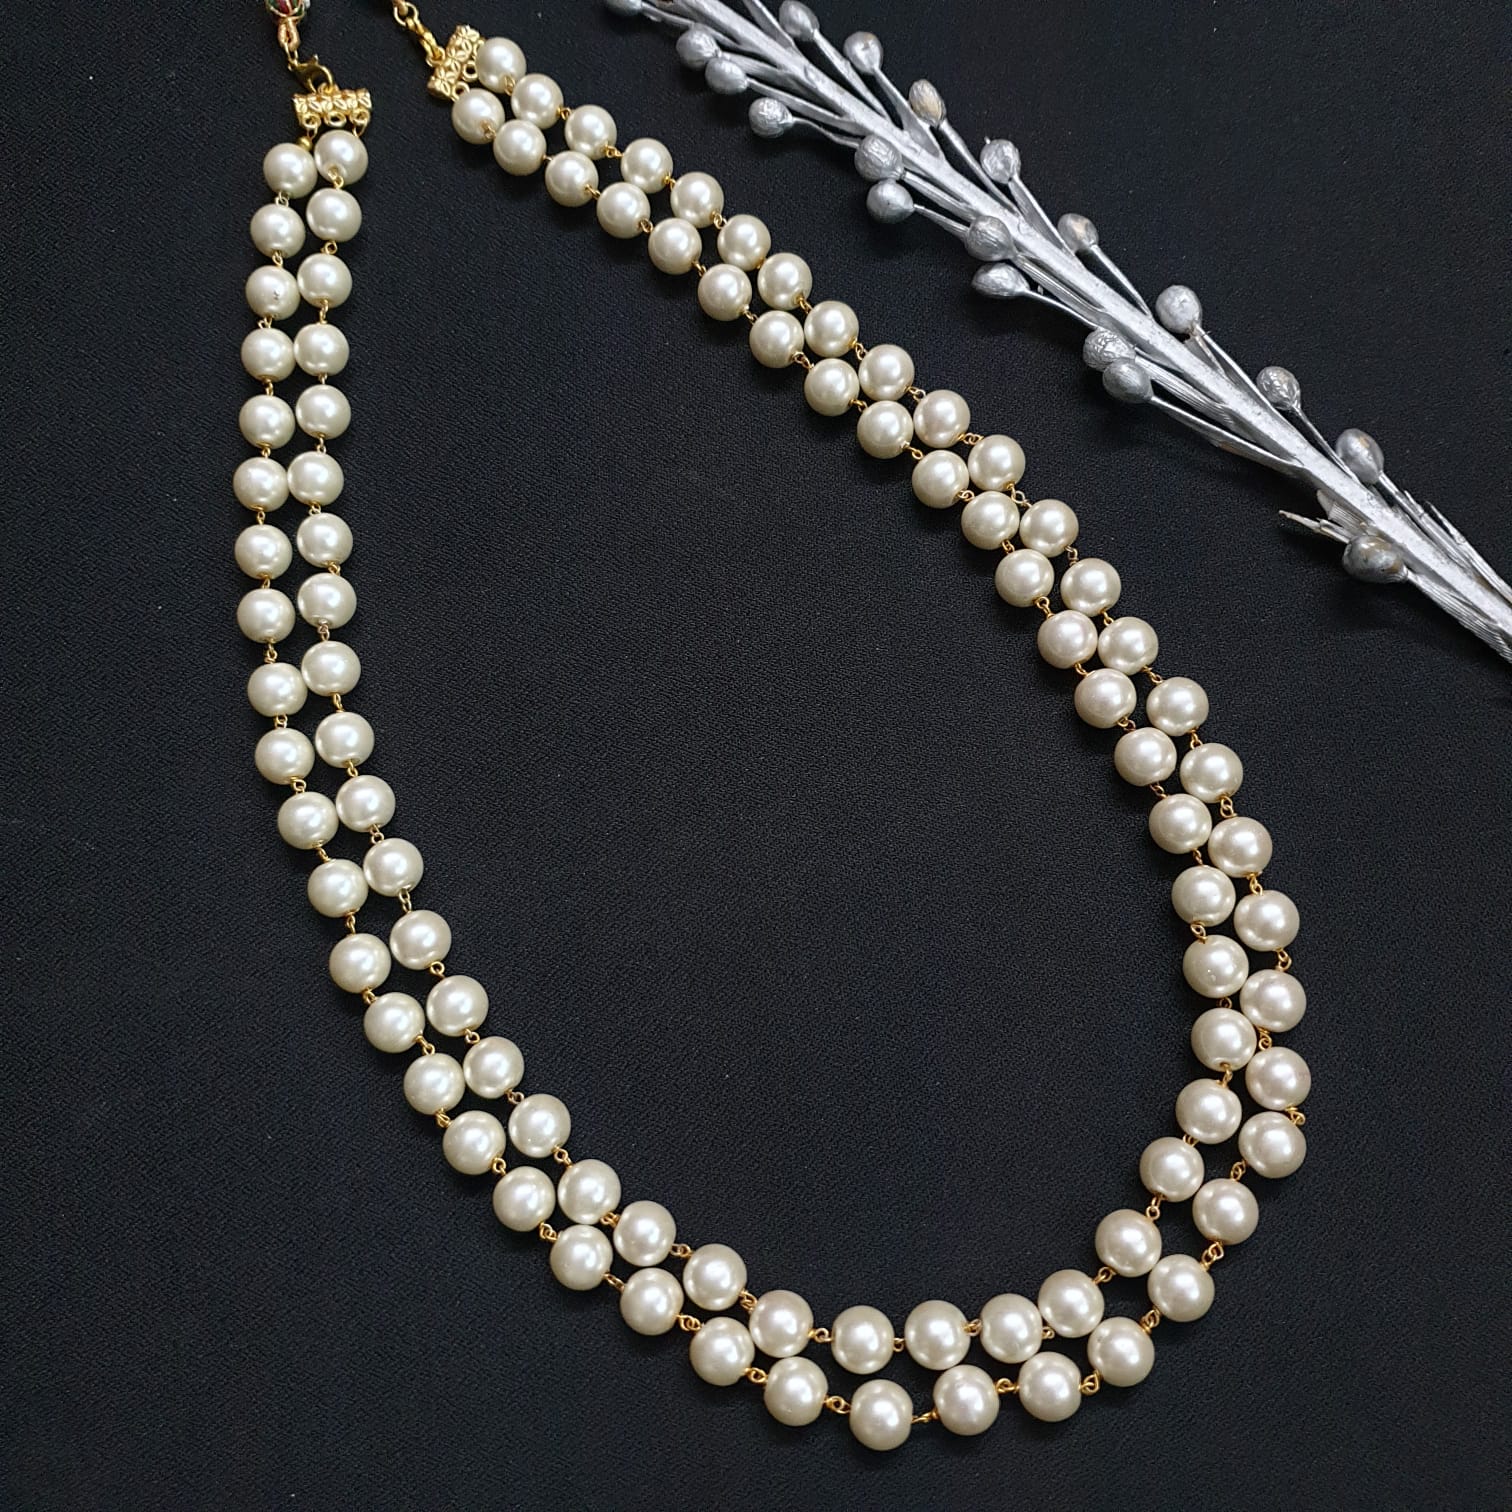 Two Layered Pearl Beaded Necklace